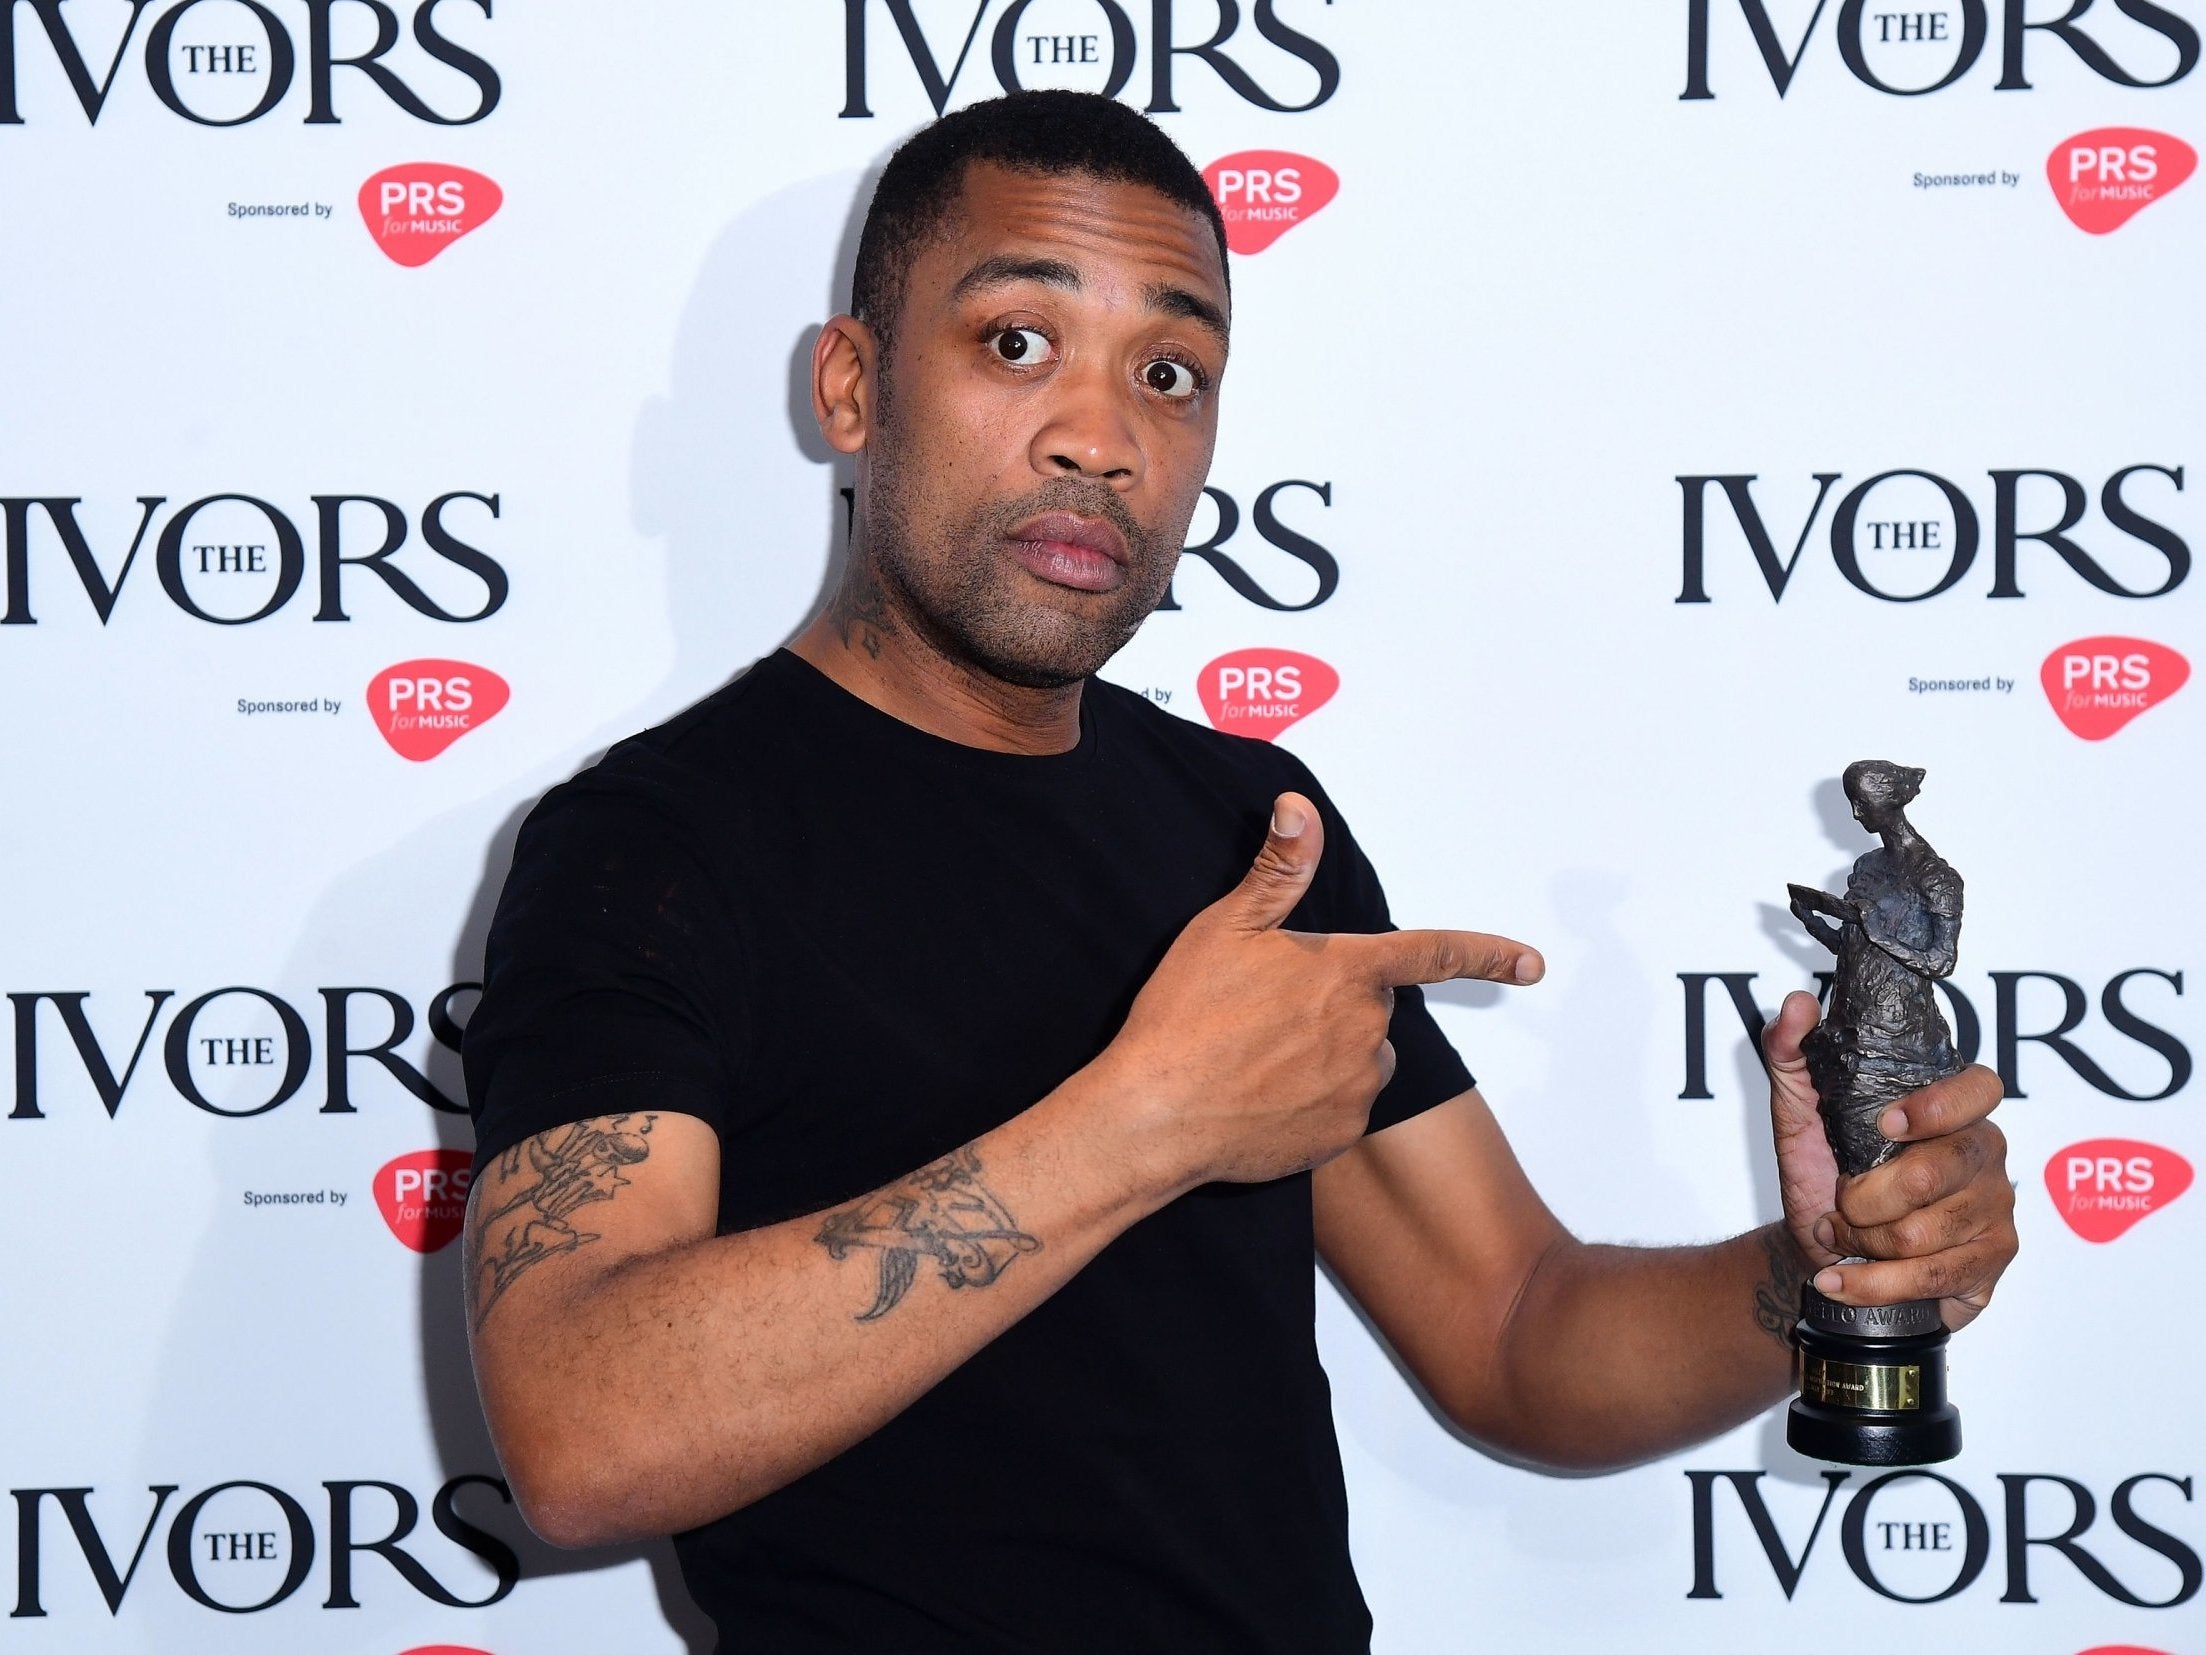 Wiley, the “Godfather of Grime”, was arrested and taken into custody after the incident